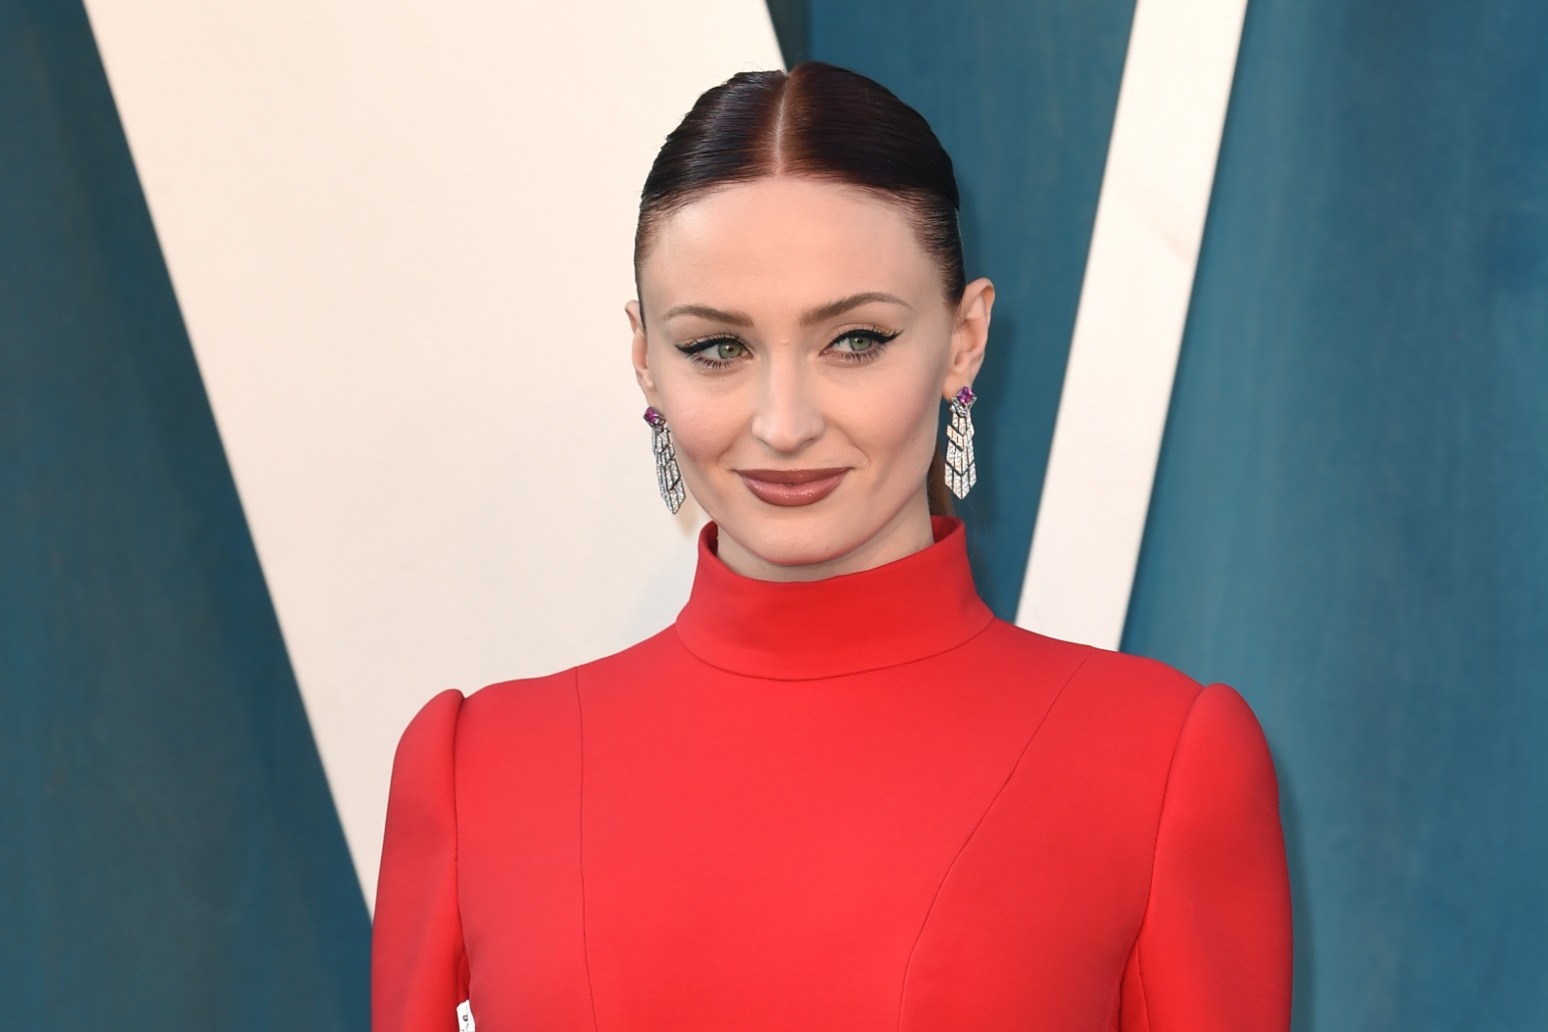 Game of Thrones star Sophie Turner takes on role as jewel thief in drama 